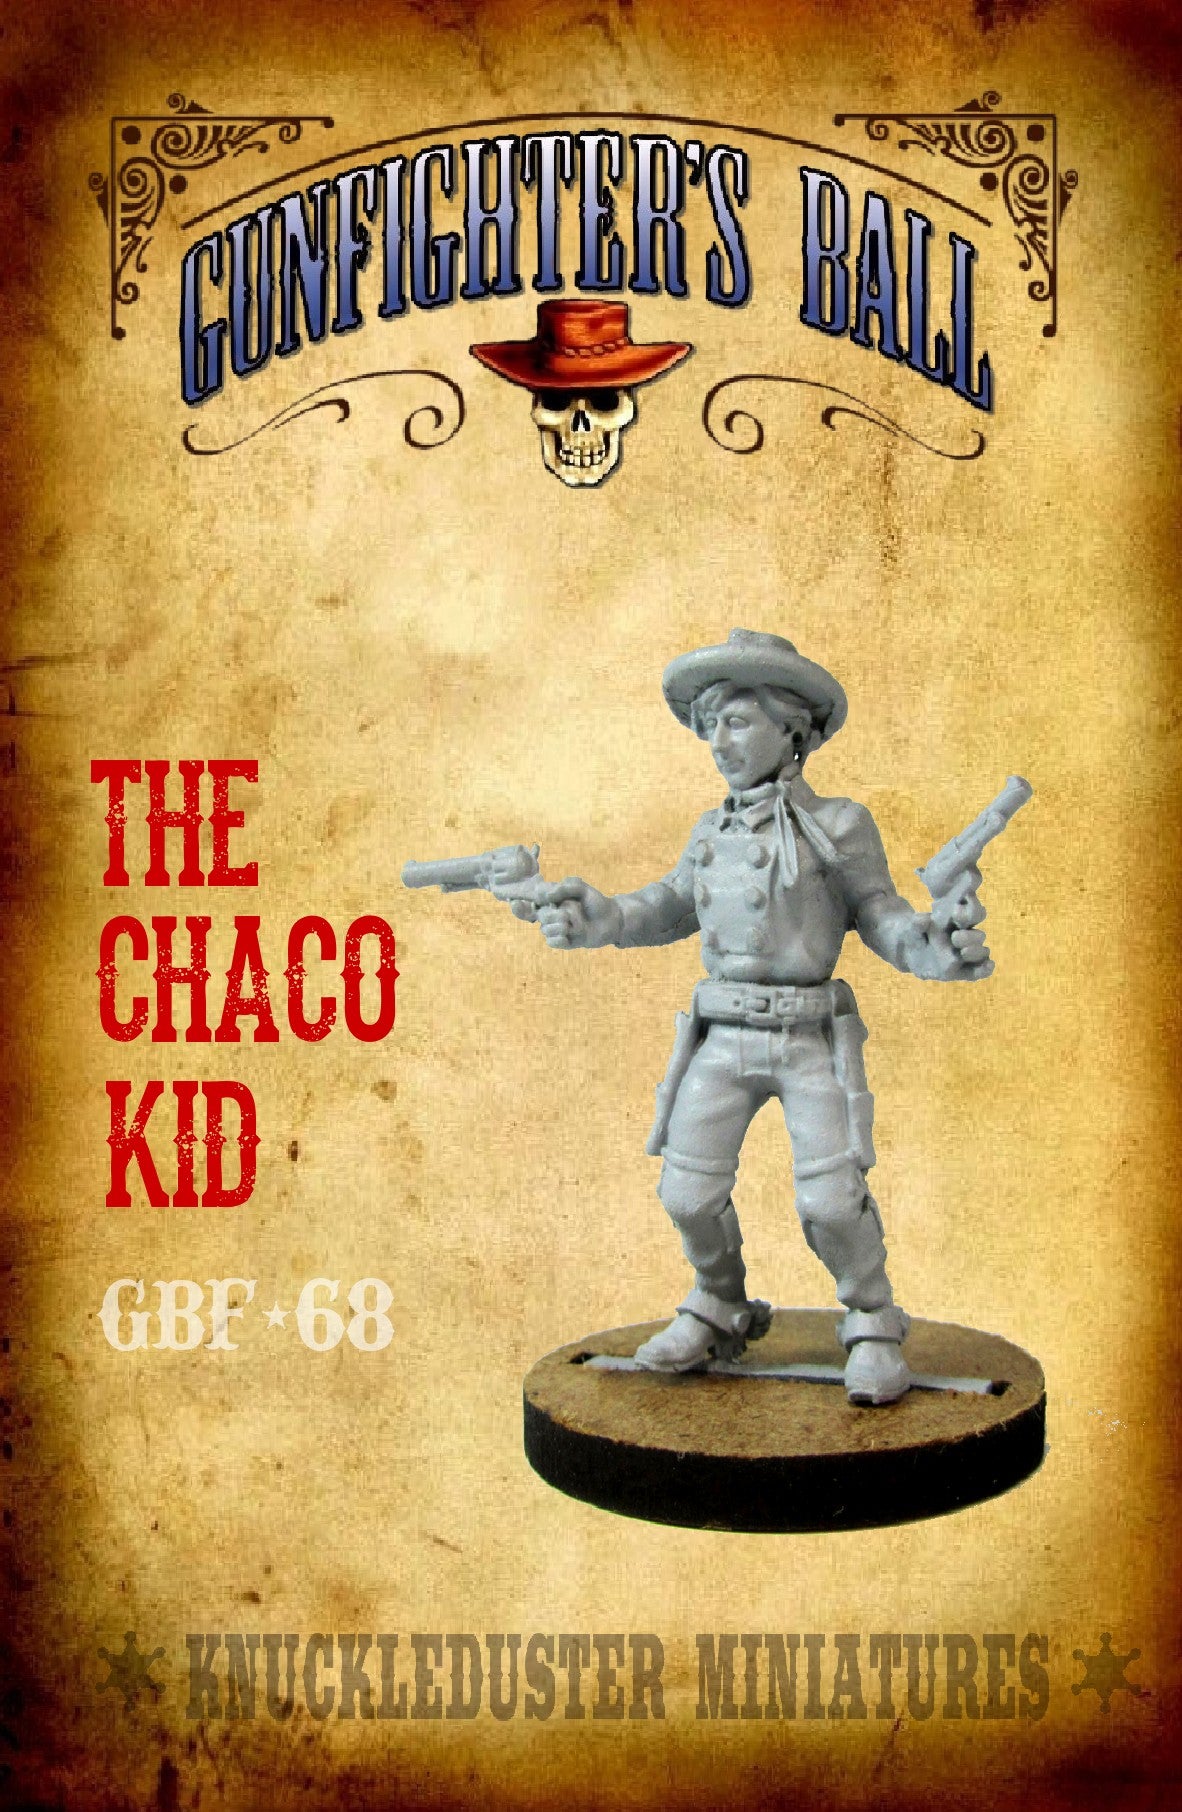 The Chaco Kid